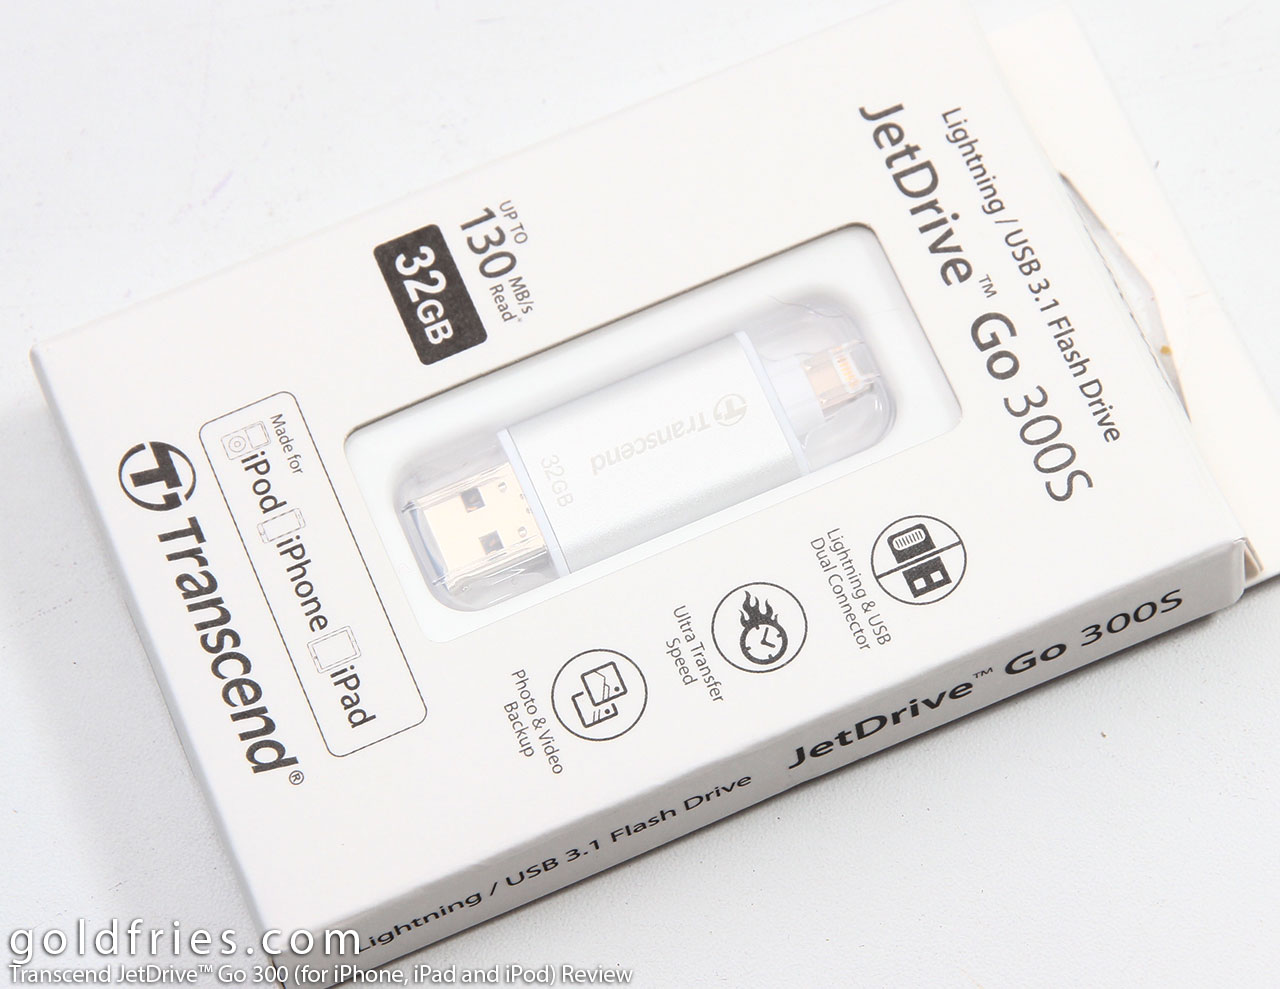 Transcend JetDrive Go 300 (for iPhone, iPad and iPod) Review